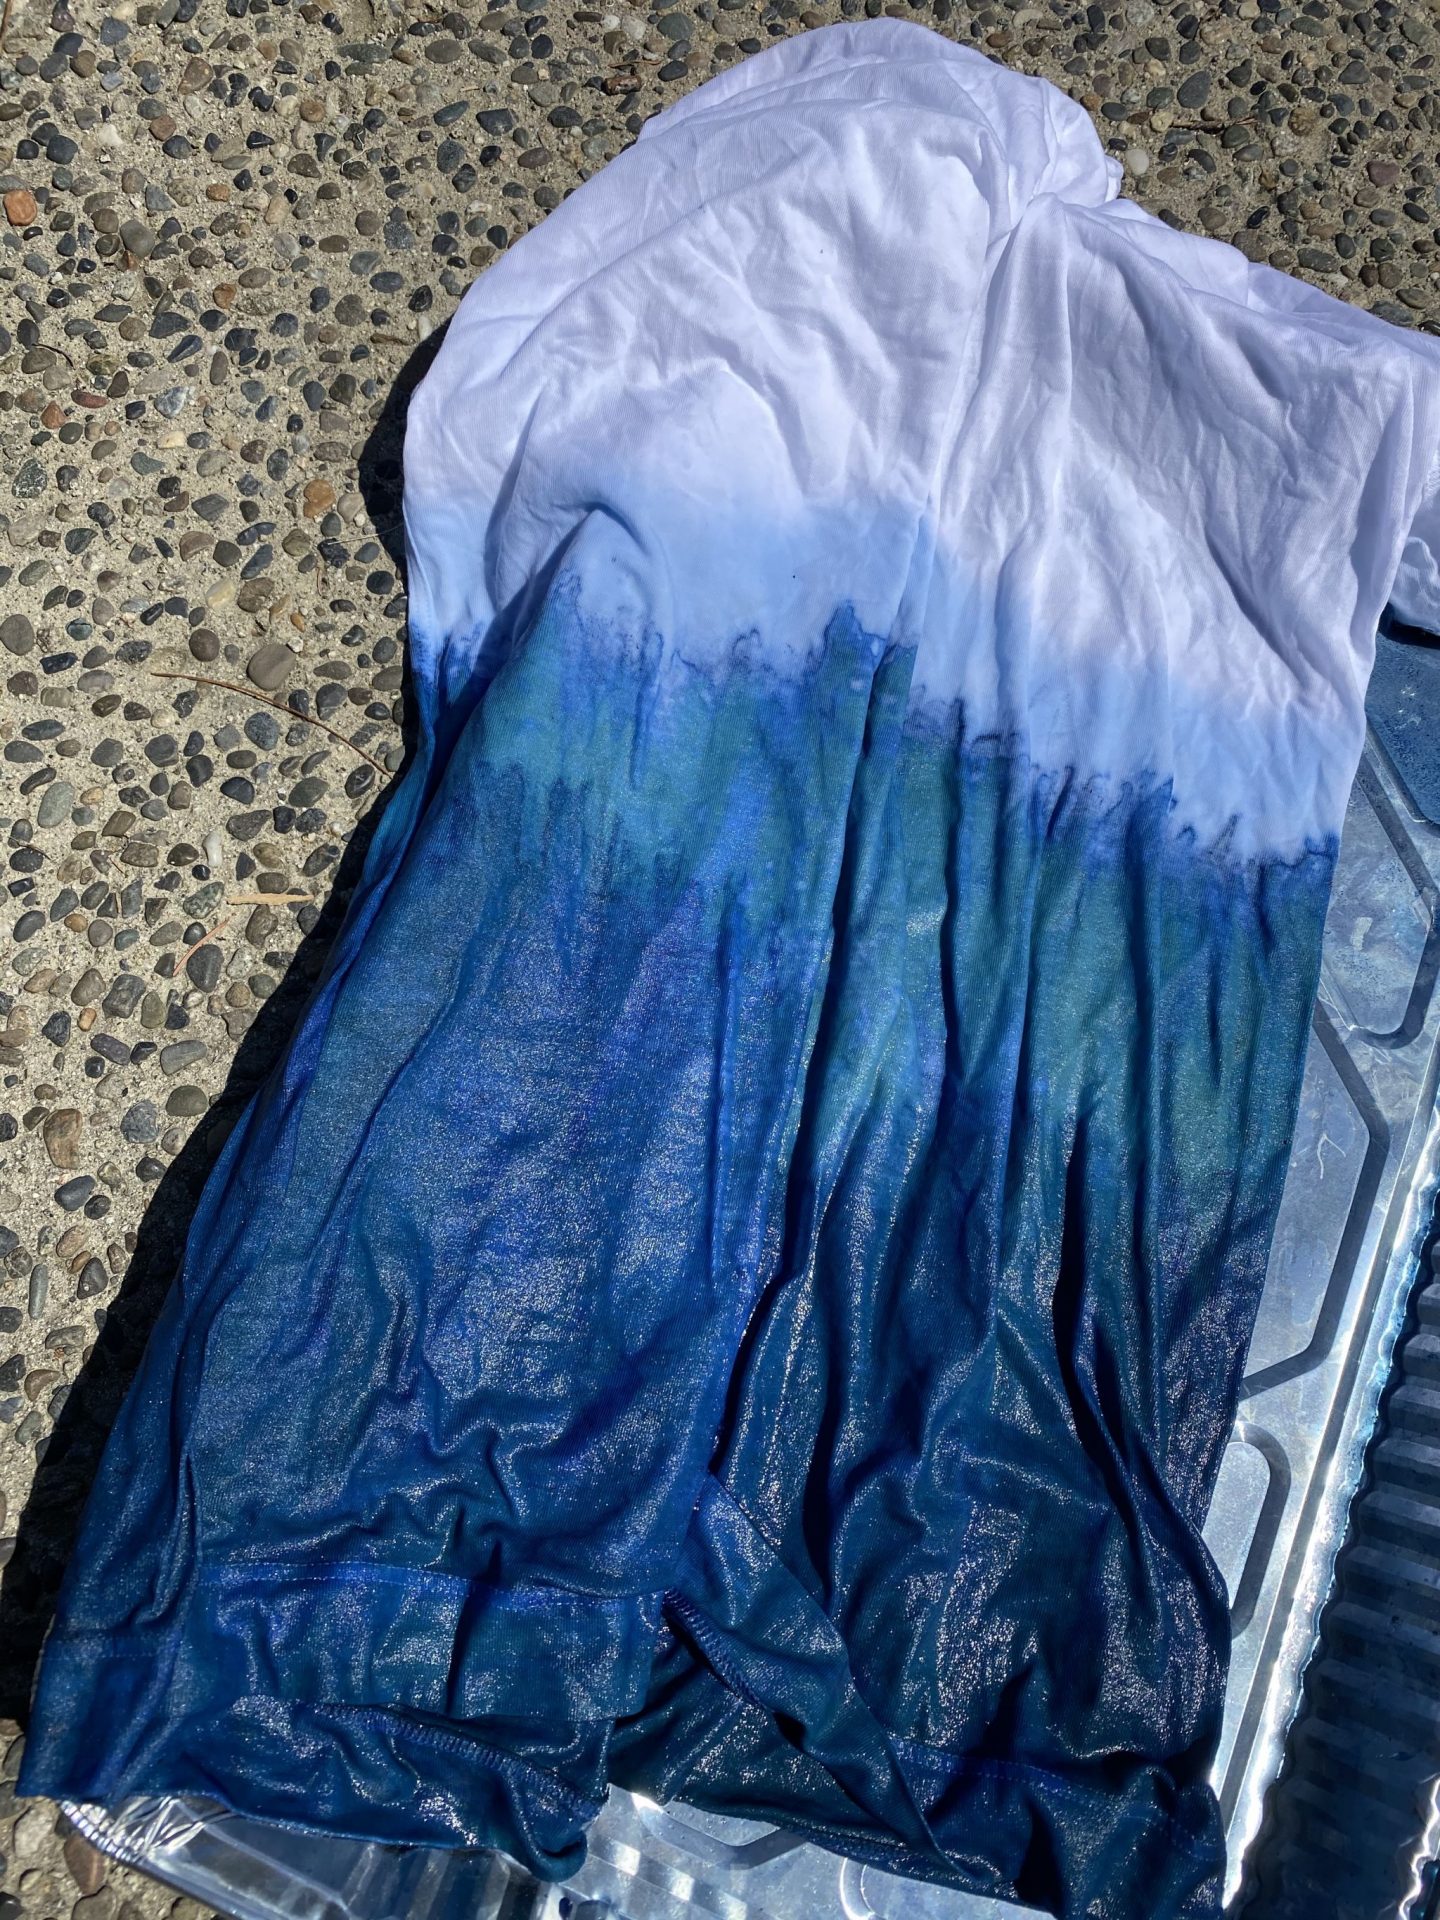 Fun With Natural Indigo Shibori Tie Dying During Shelter In Place